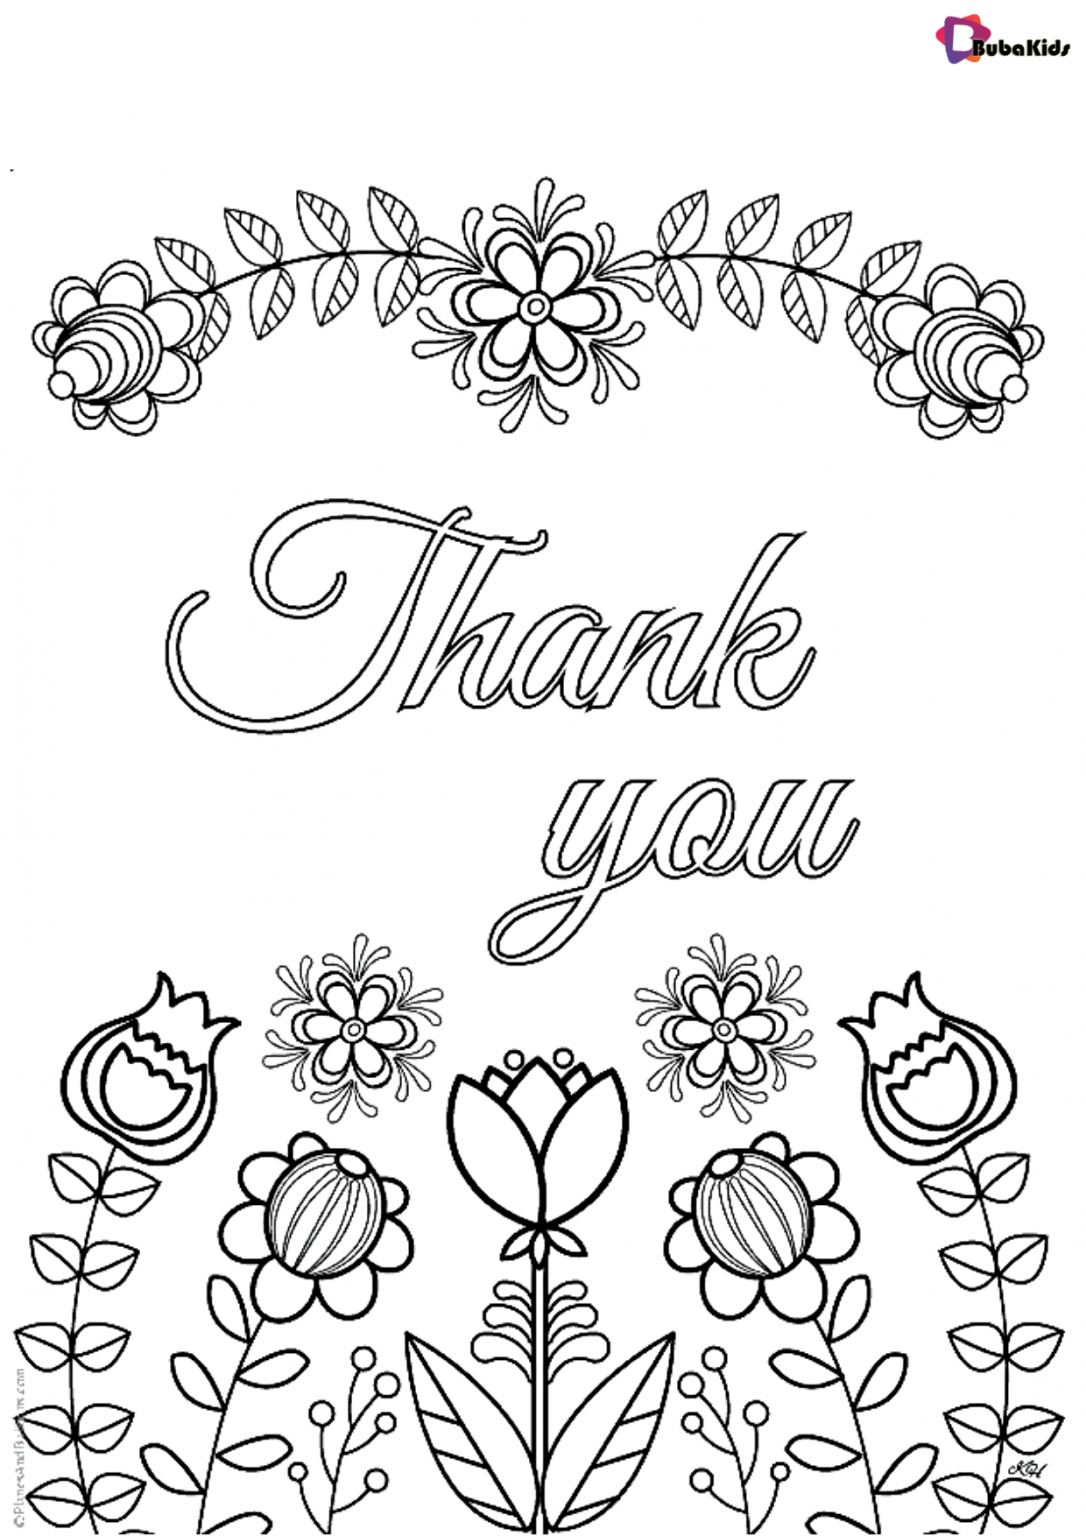 Thank you teacher coloring pages teacher appreciation day